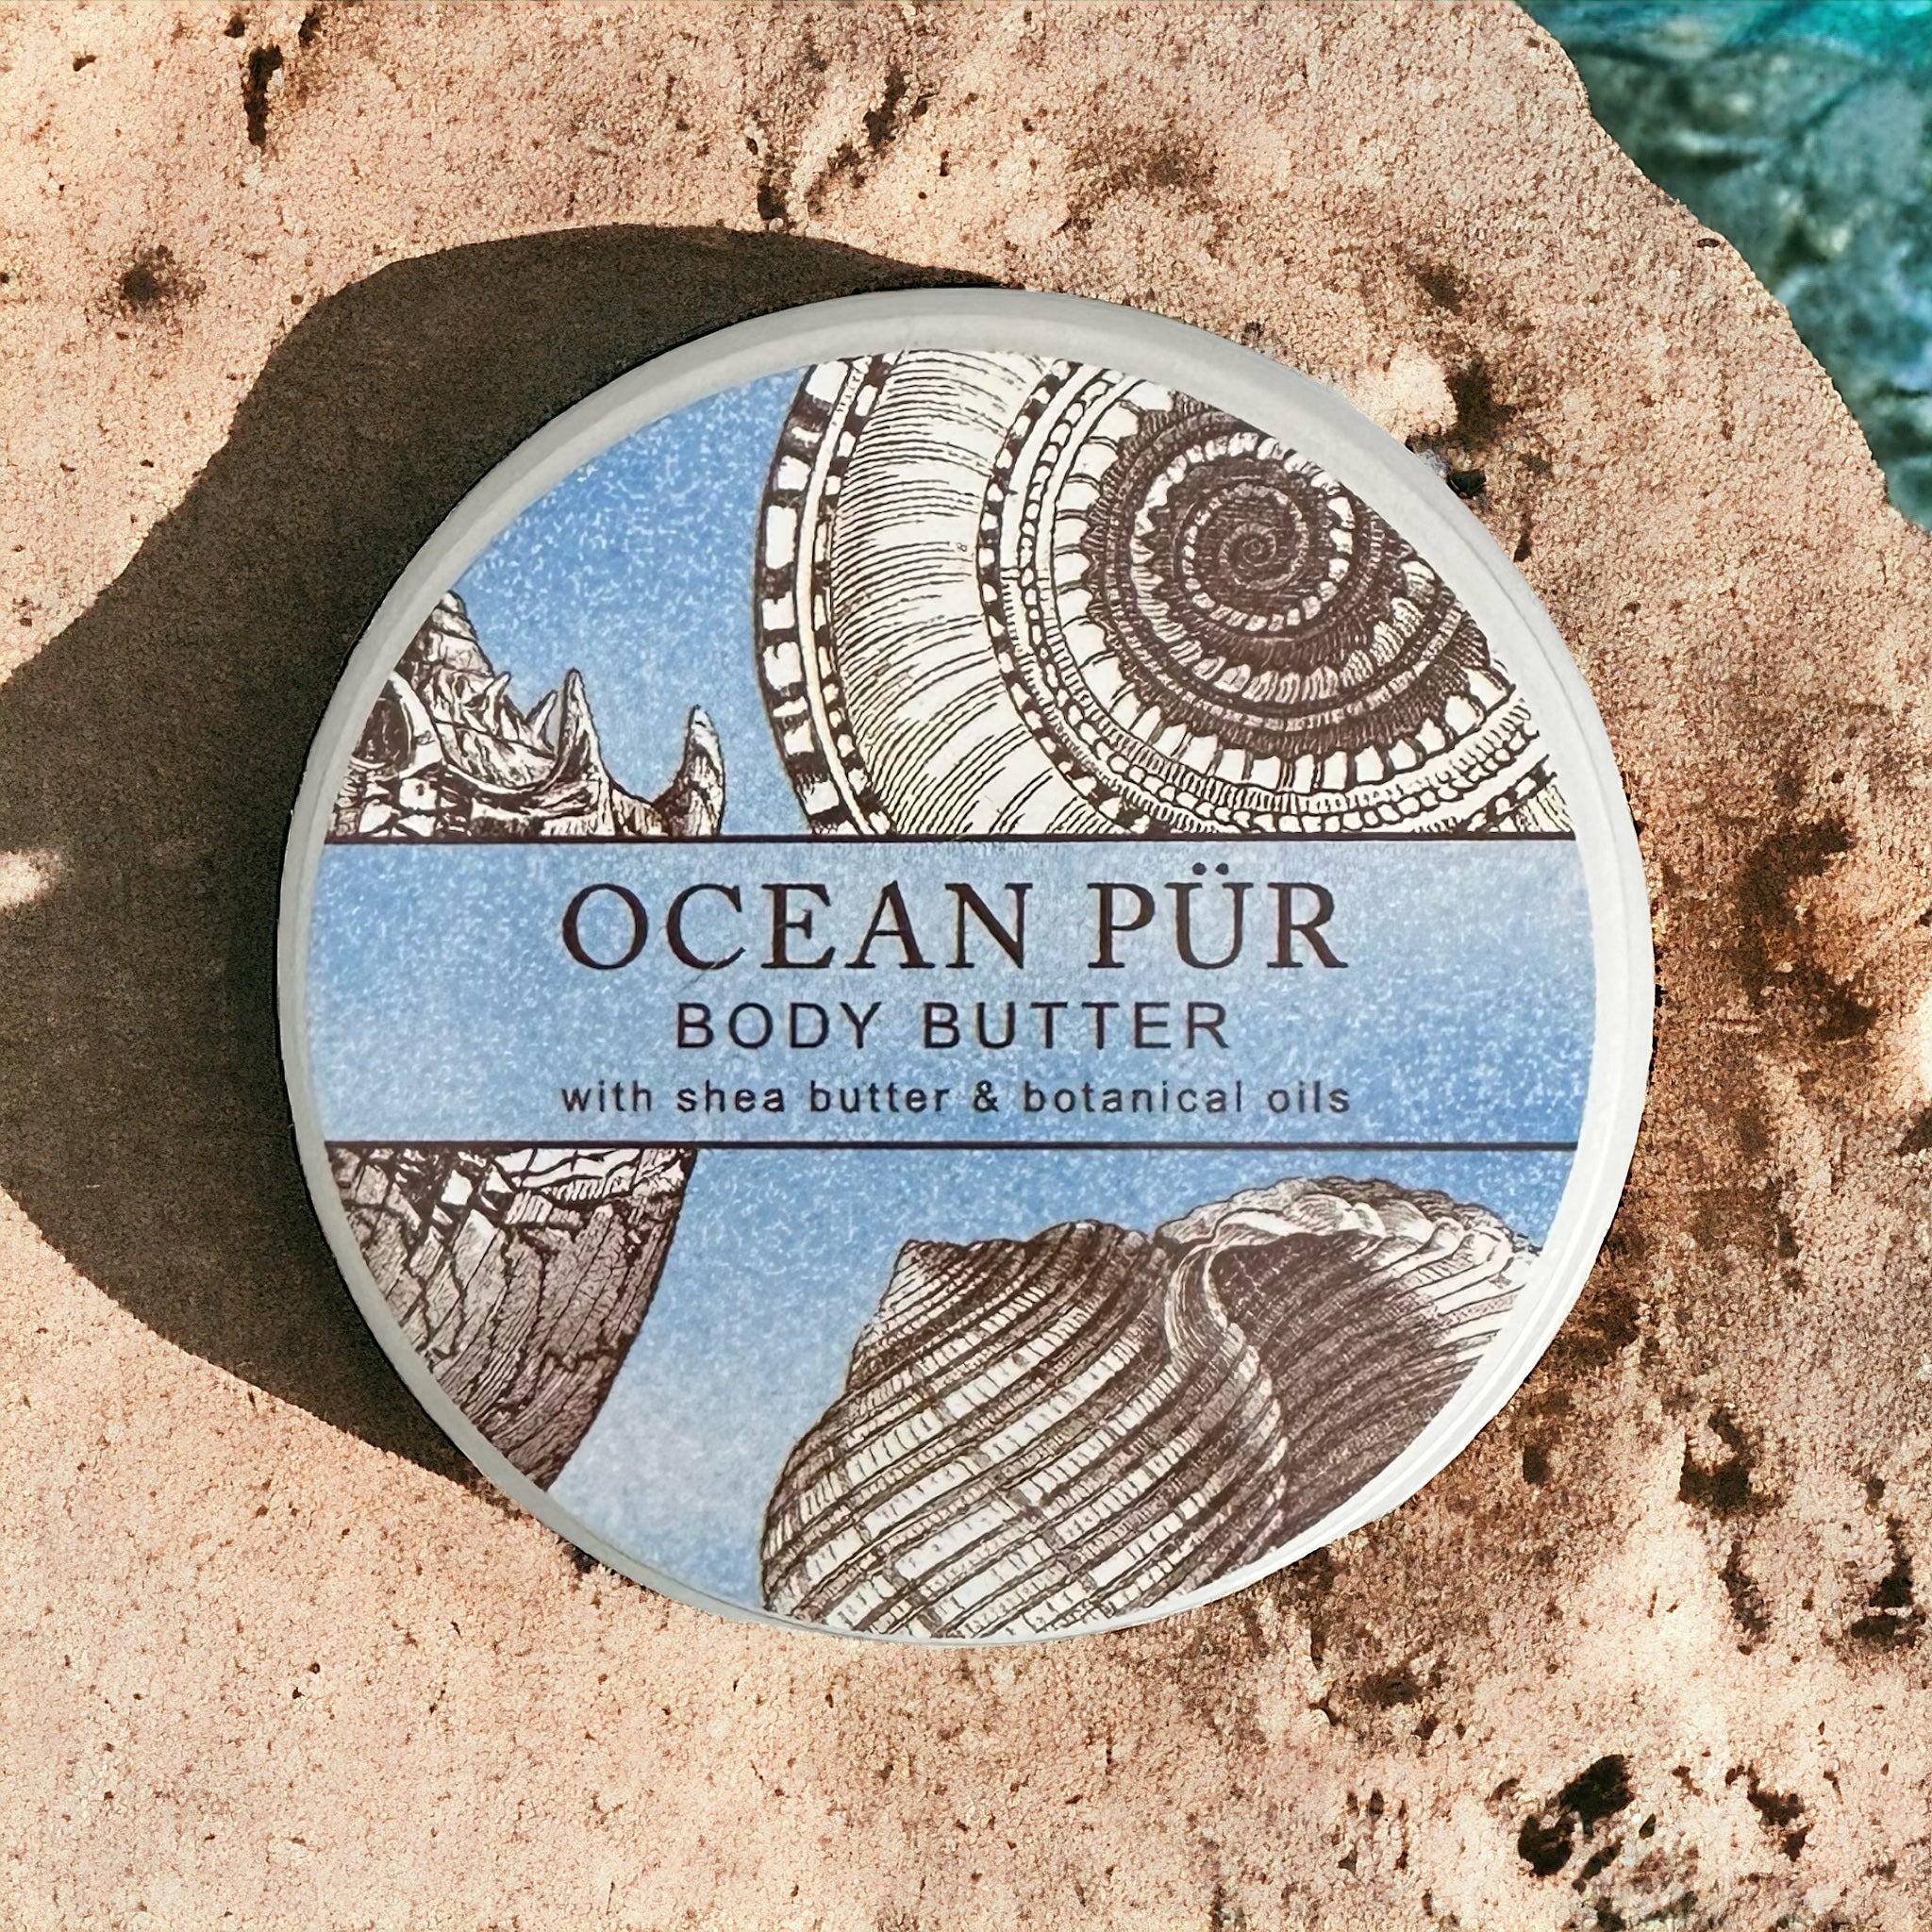 Greenwich Bay Trading Company OCEAN PUR Body Butter